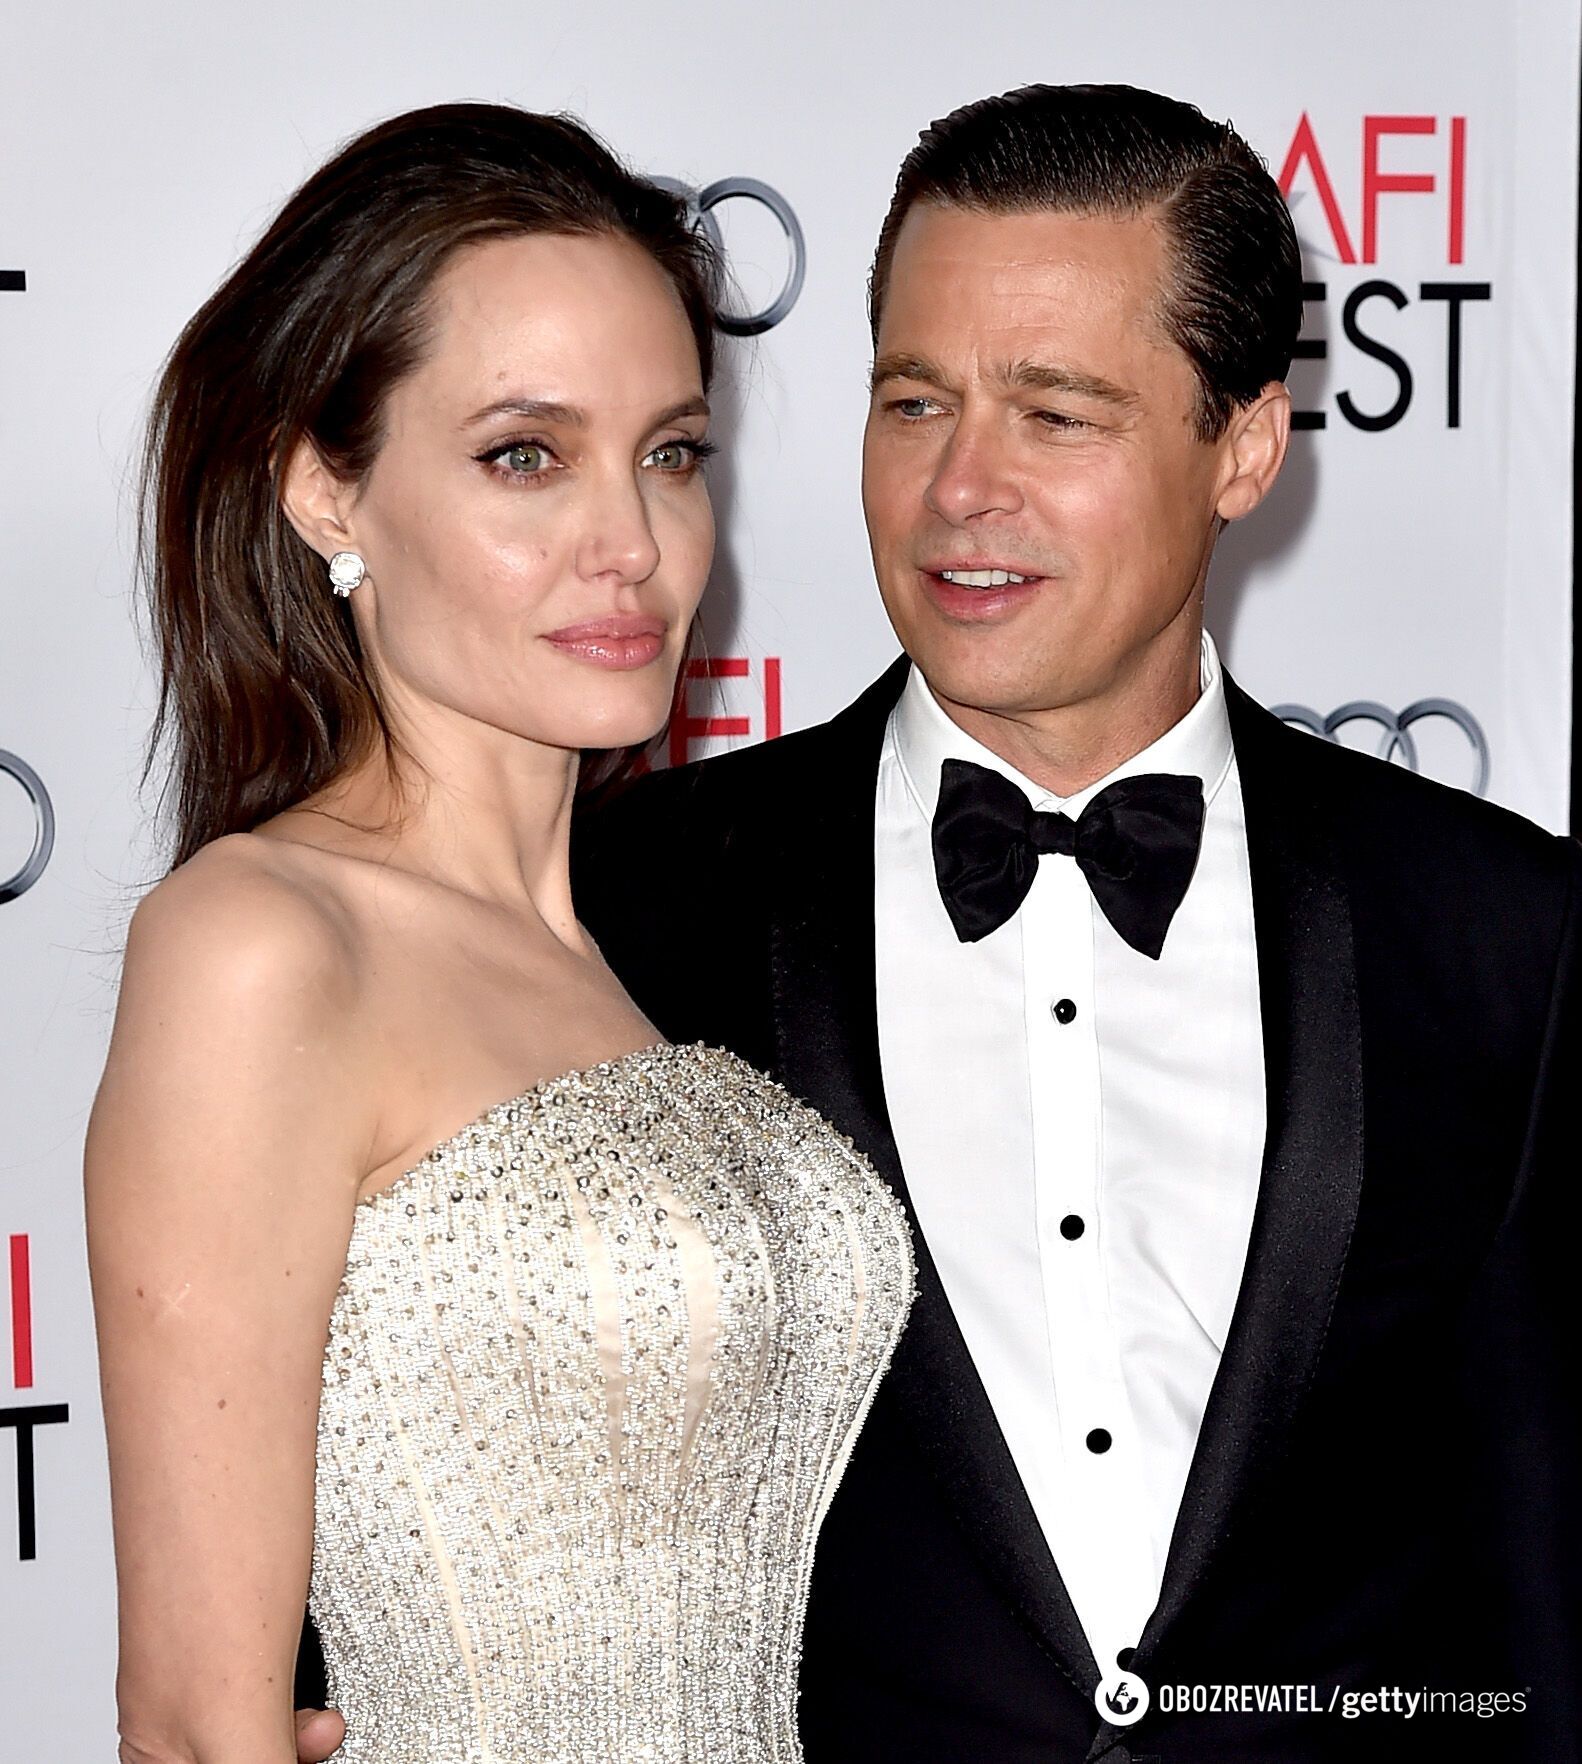 Angelina Jolie has accused Brad Pitt of physically abusing her and their children. What is known